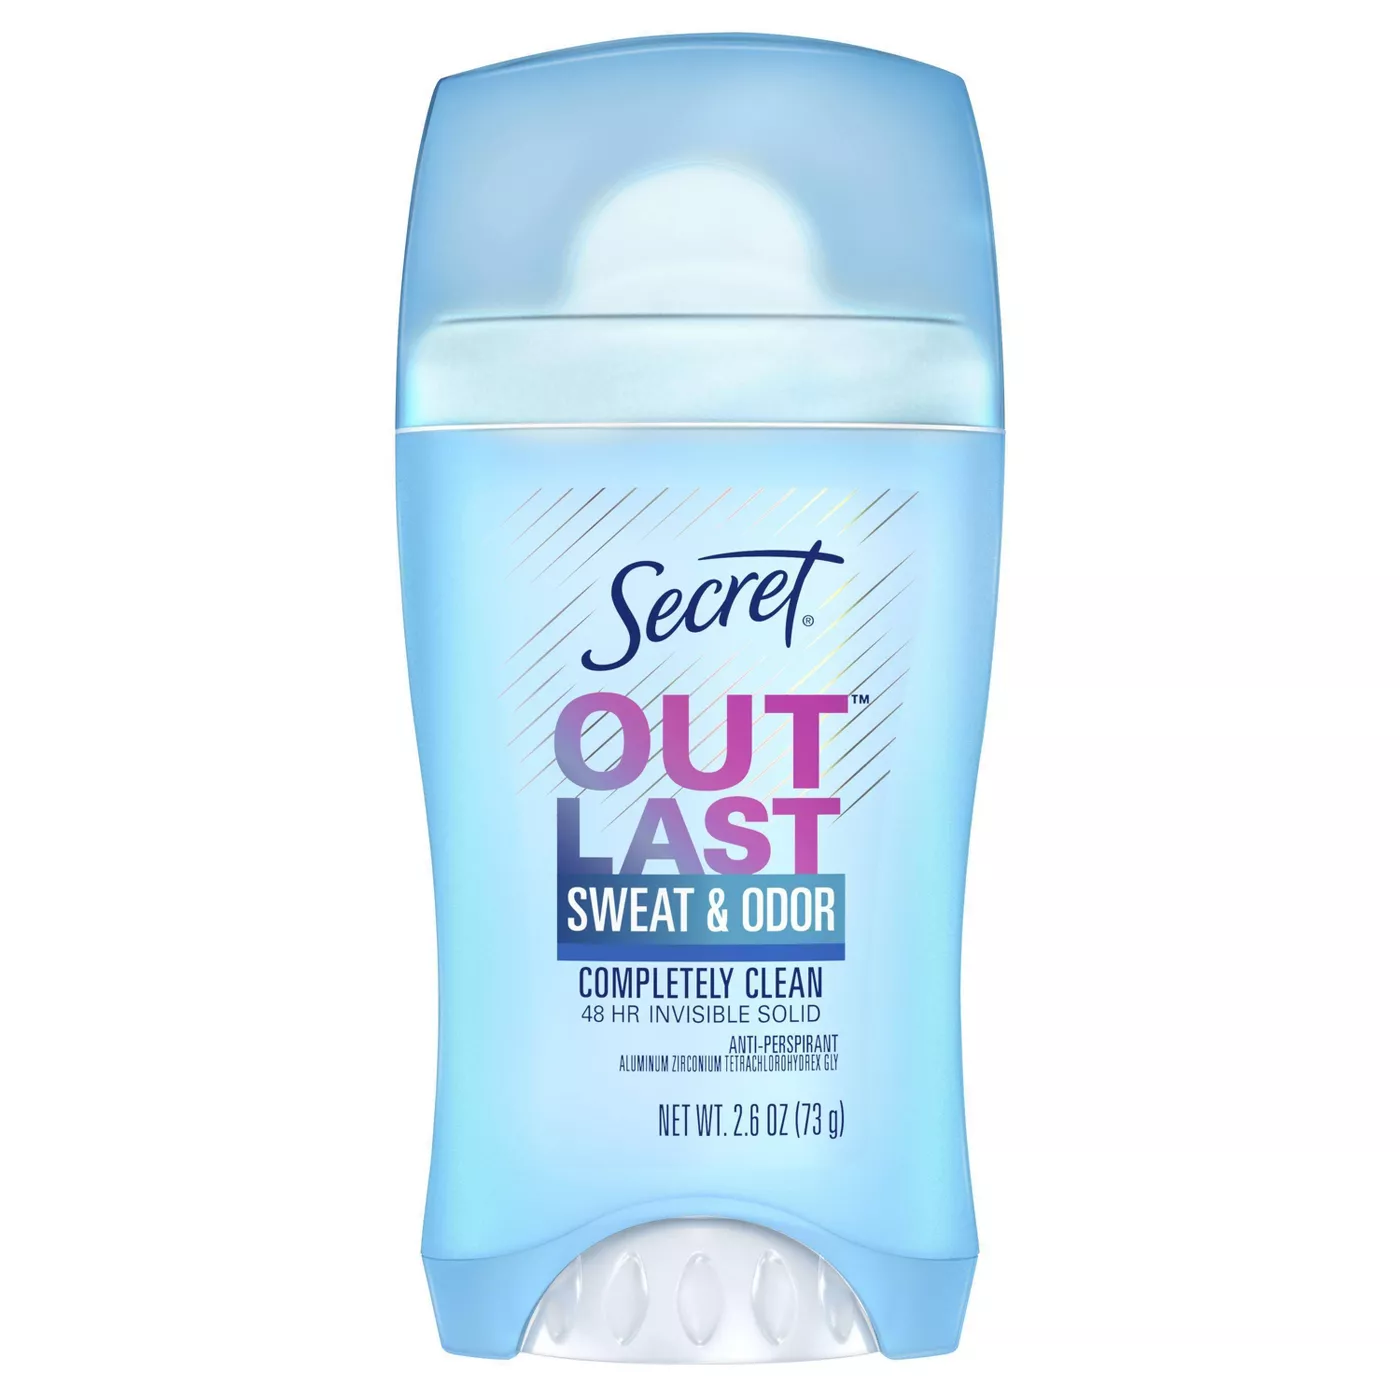 The Secret Outlast Invisible Solid Antiperspirant Deodorant travel product recommended by Madison Gabor on Lifney.